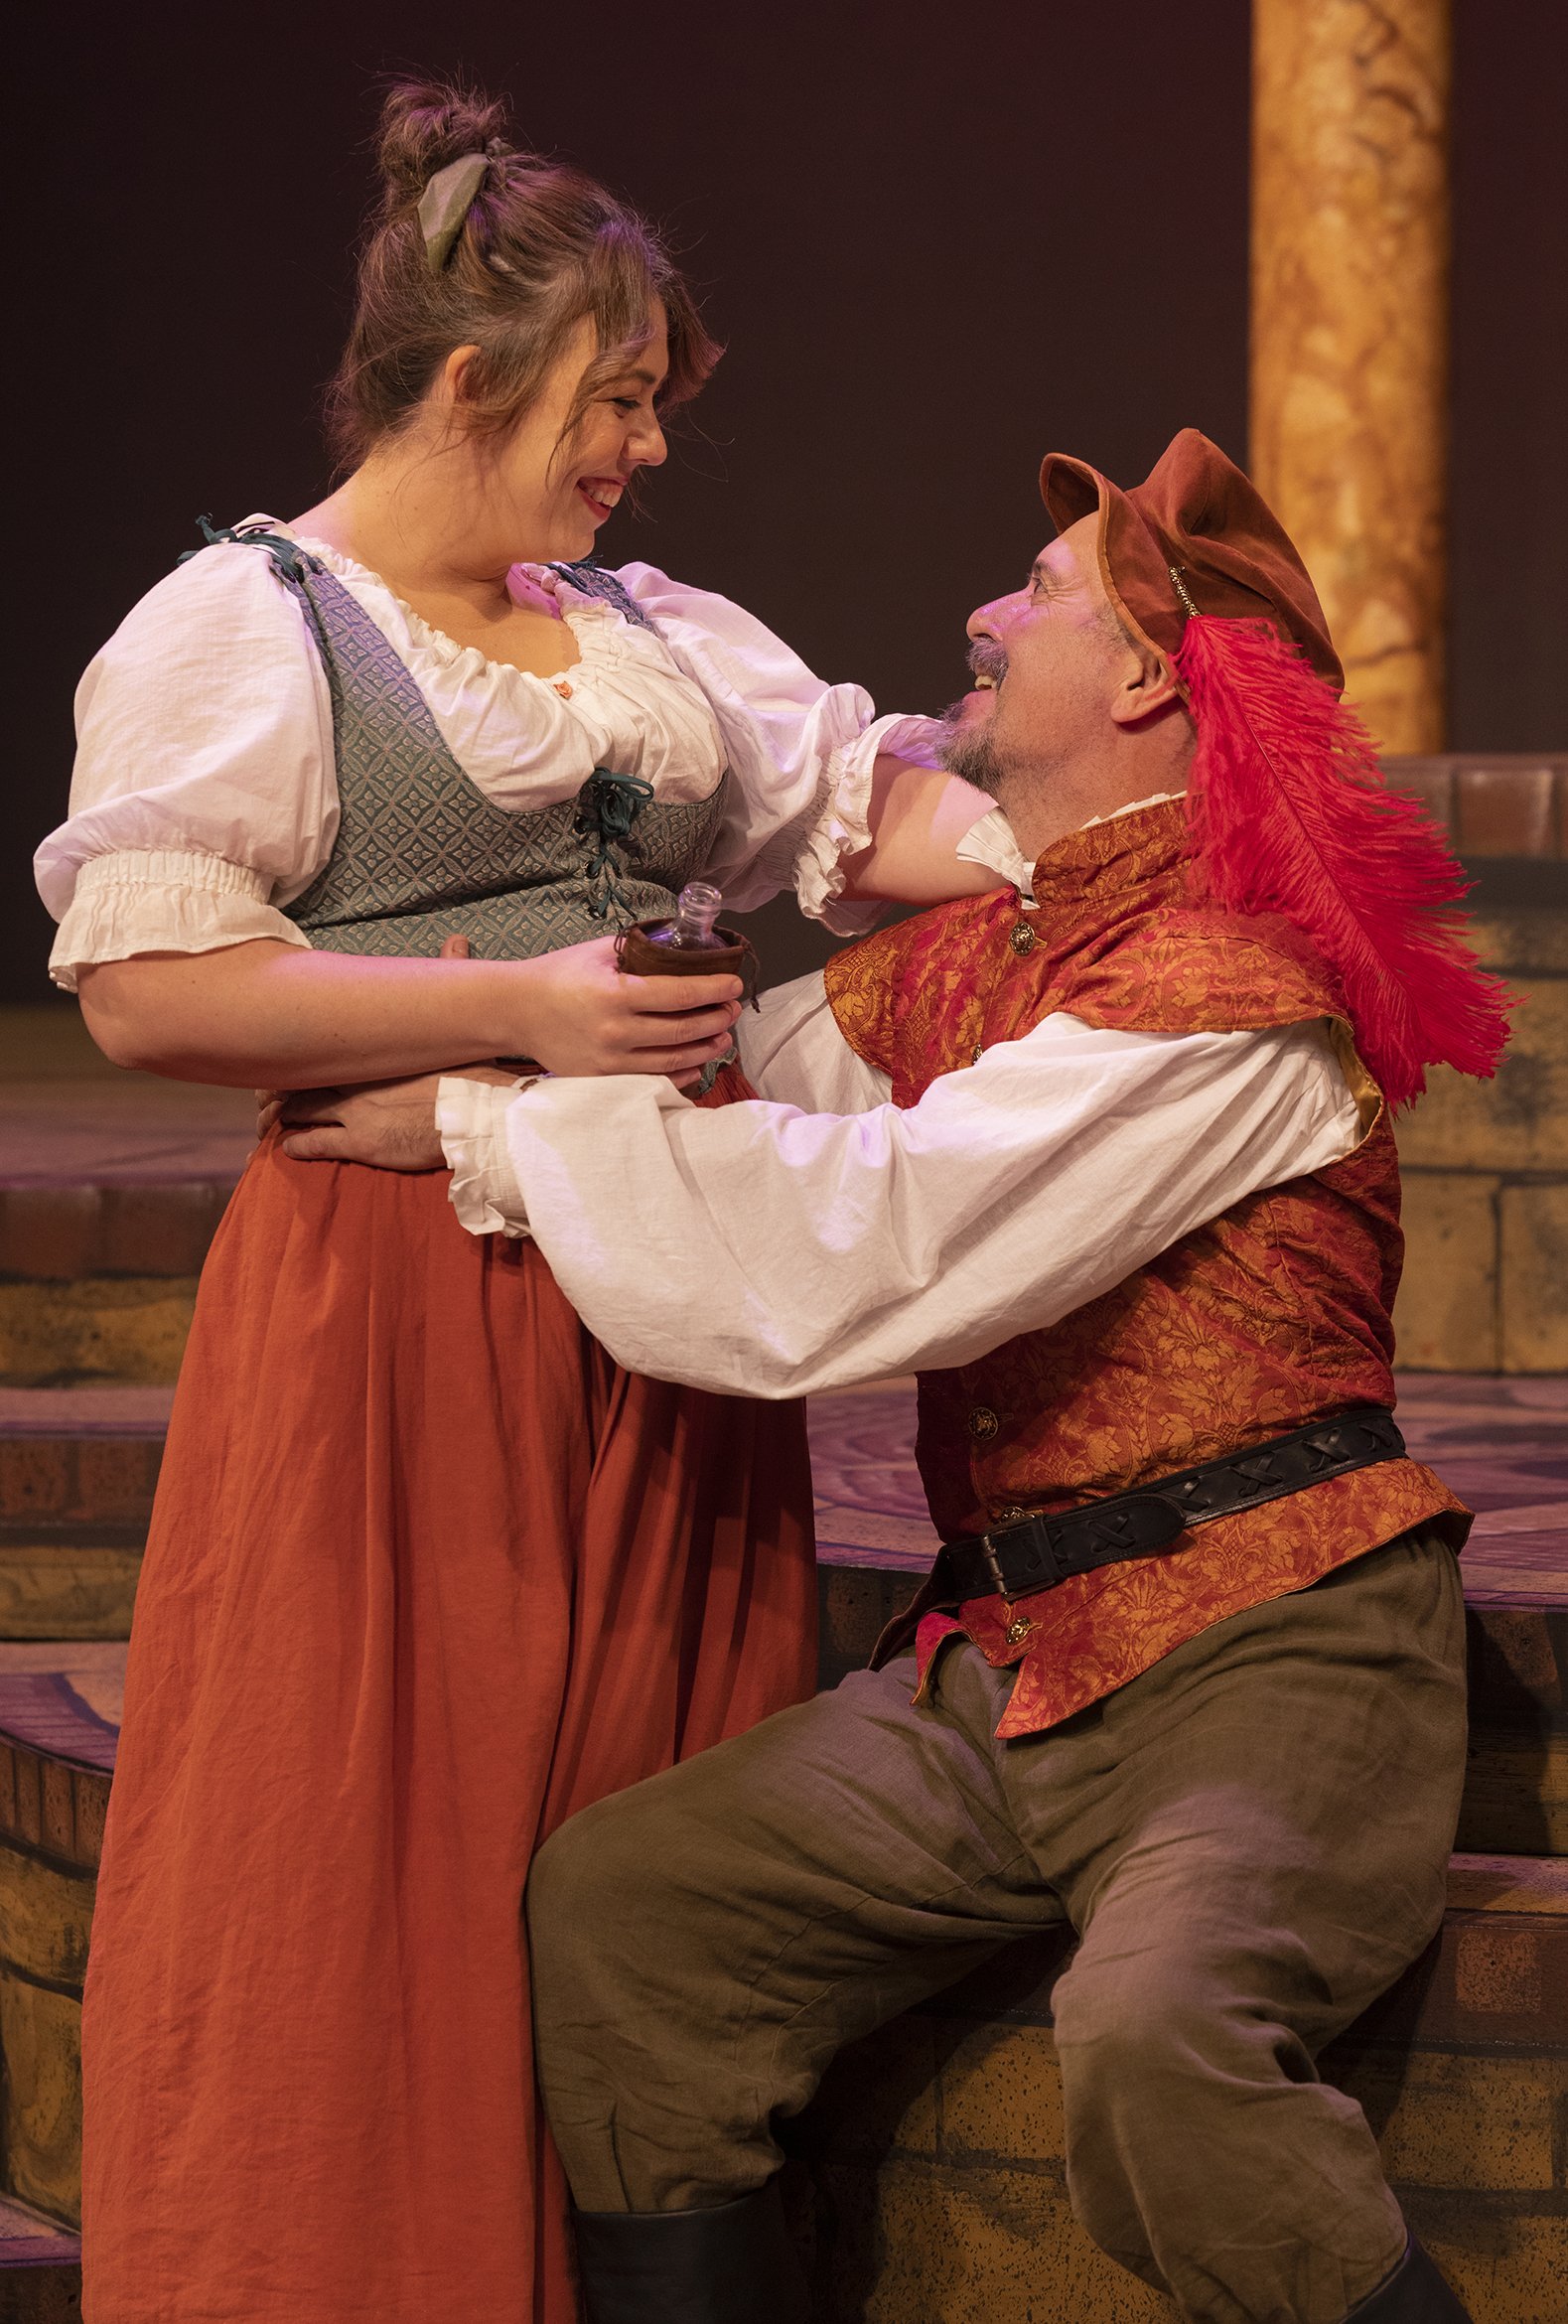 Chelsea Bowdren as Maria and Michael Levin as Sir Toby. Photo by Tim Fuller.